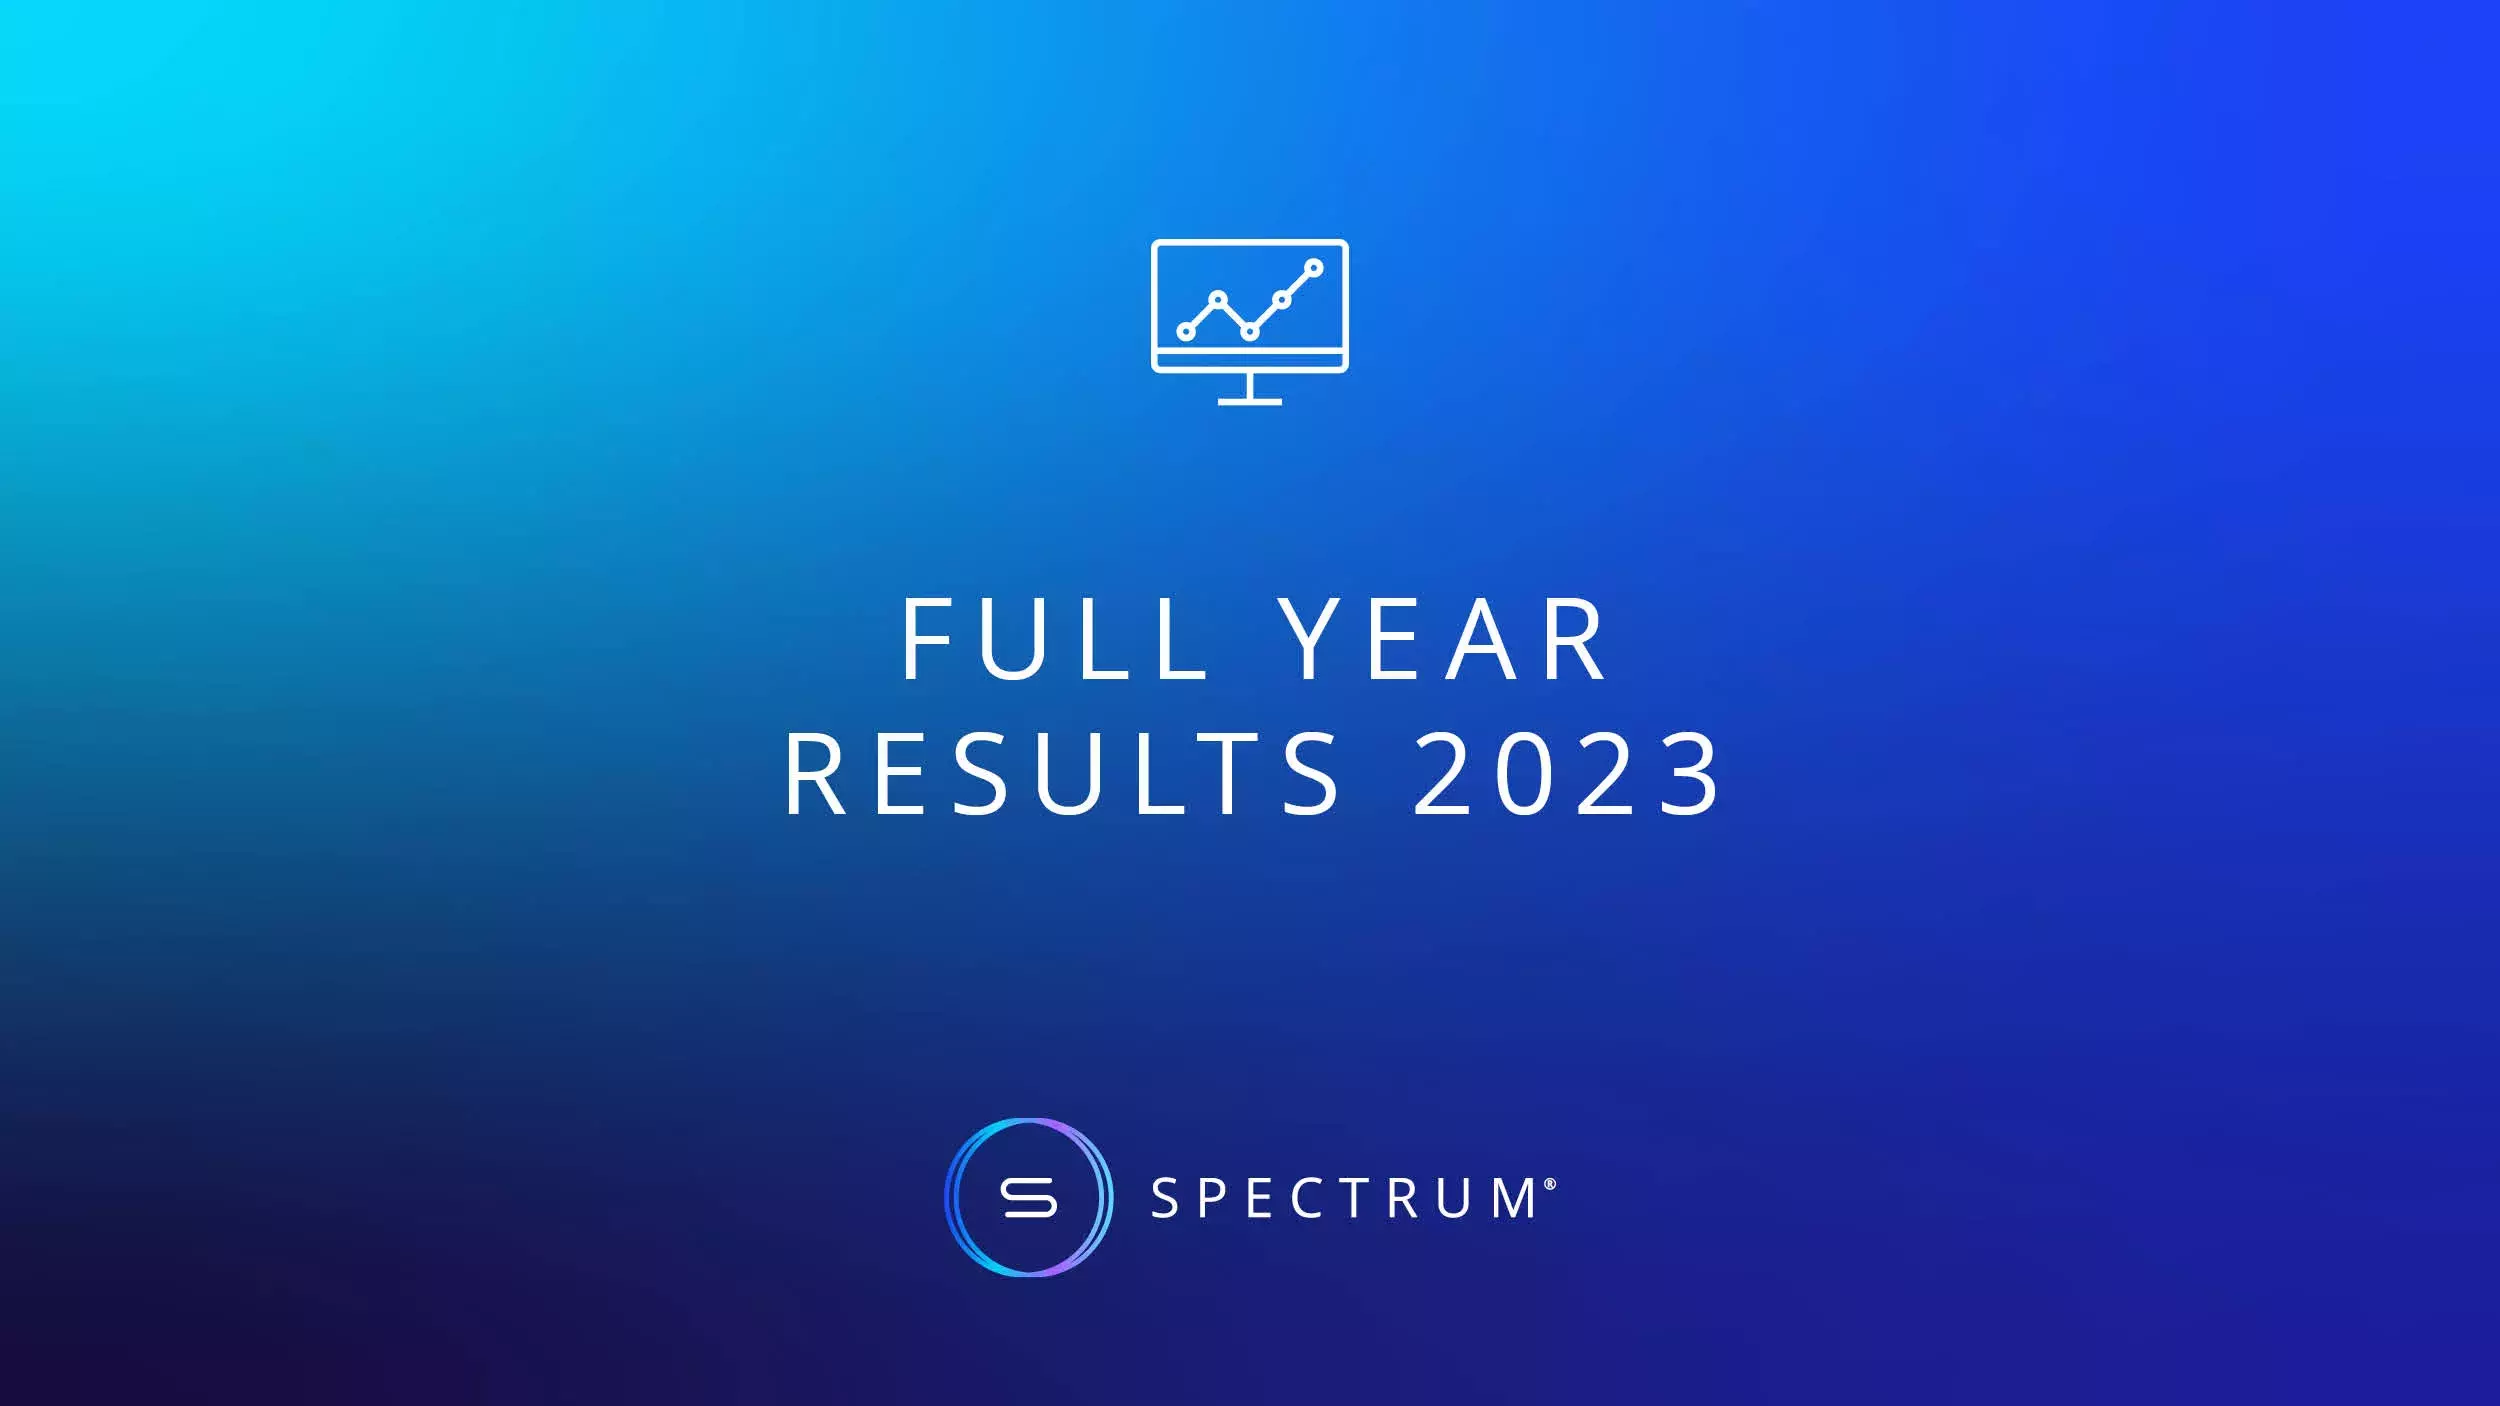 Full year results 2023